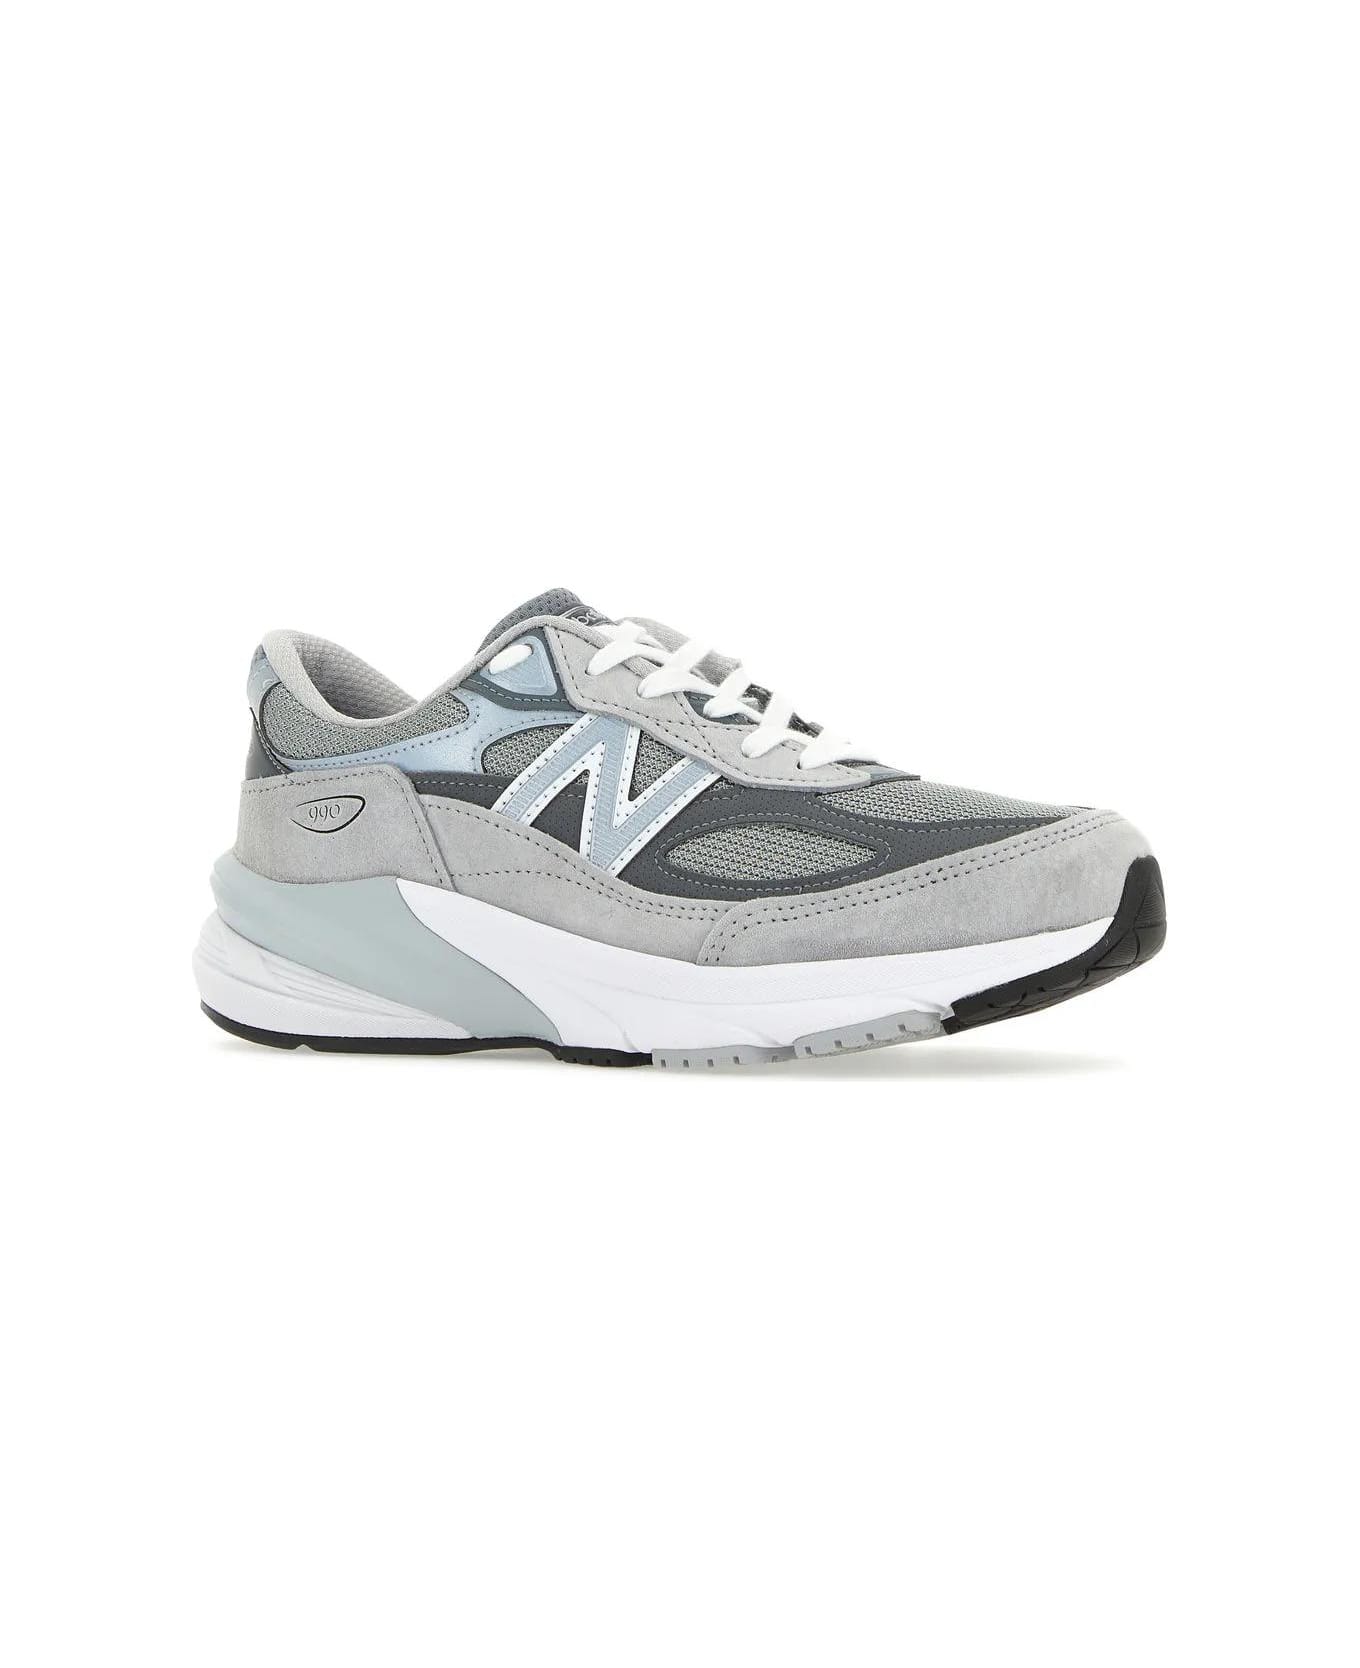 New Balance Multicolor 990v6 Mesh And Suede Sneakers - GREY